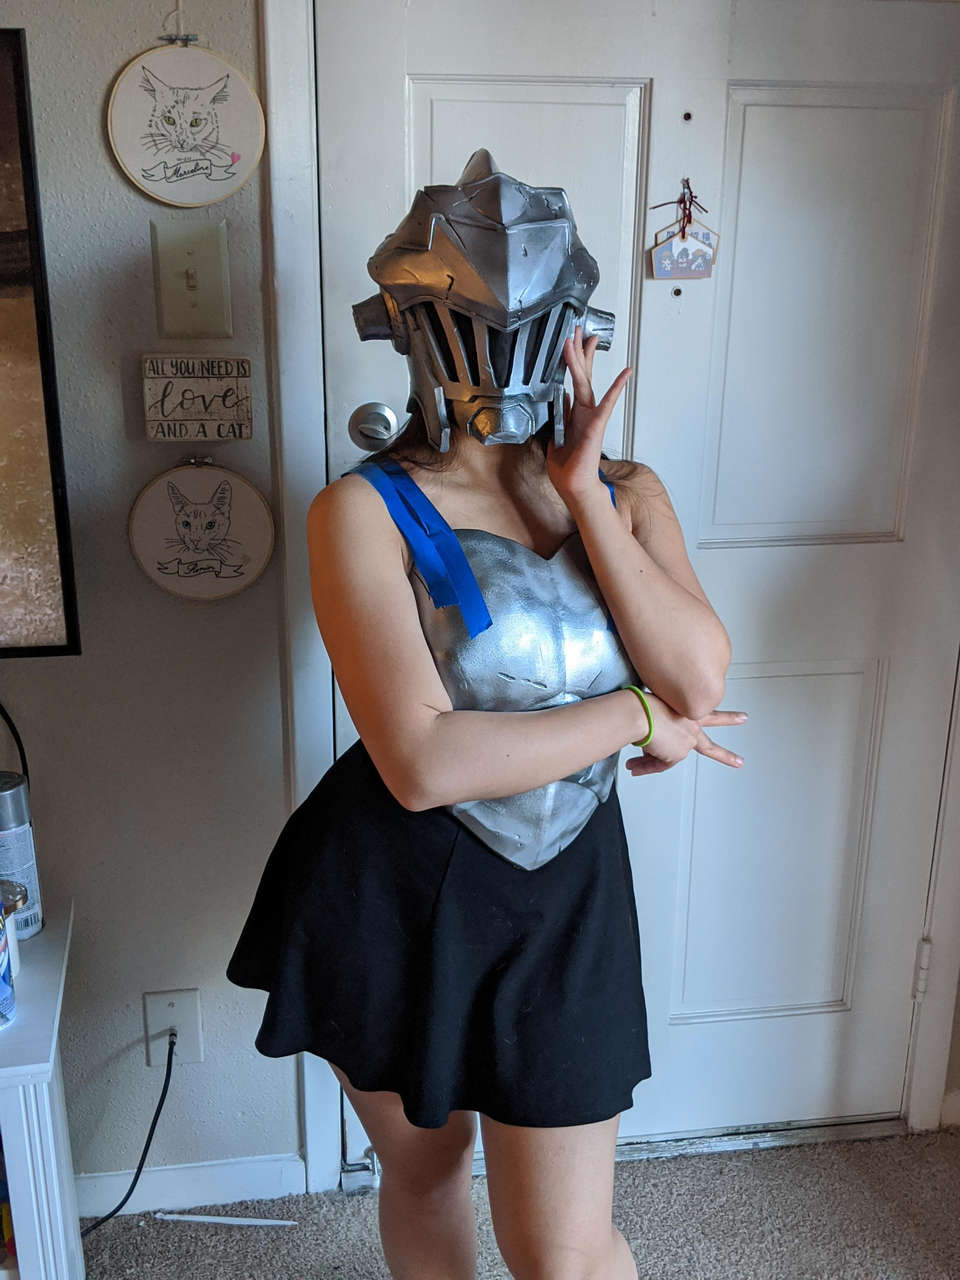 Oc Building A Femme Goblin Slayer Cosplay Thought I Would Have Some Fun With The Wi